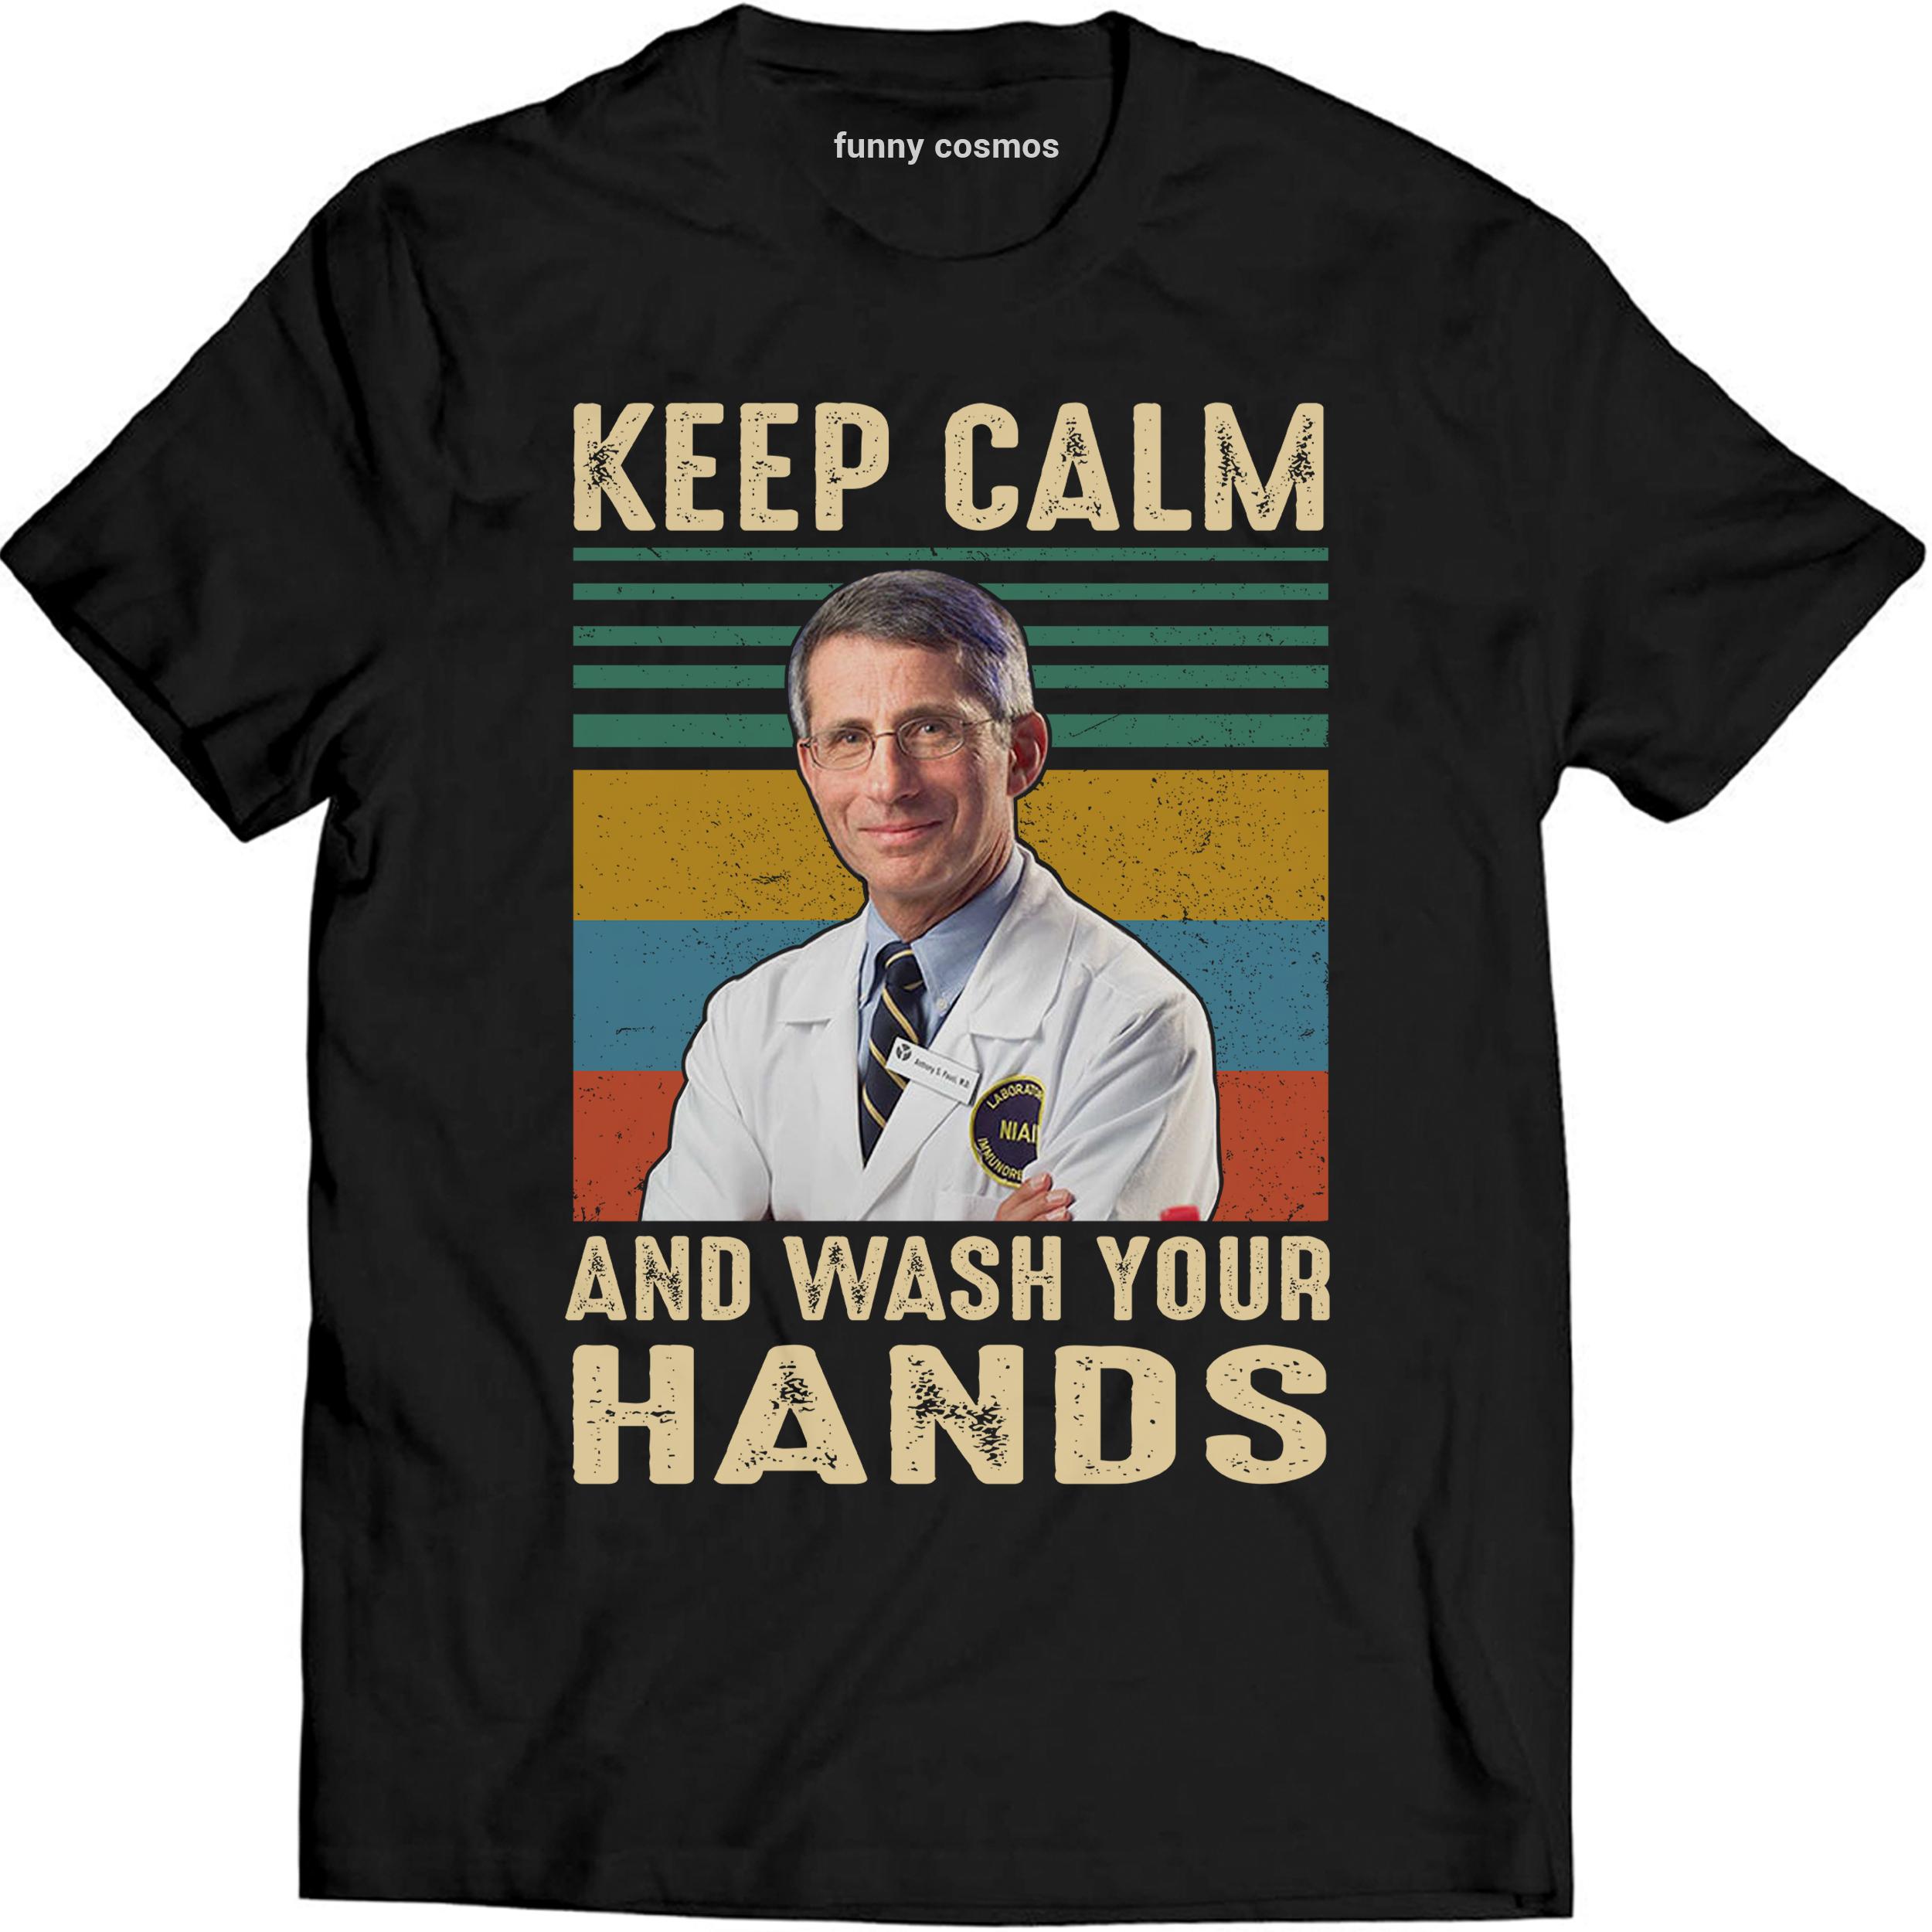 Dr Anthony Lovers Fauci Says Keep Calm And Wash Your Hands Vintage Shirt Social Distancing Funny T Shirt